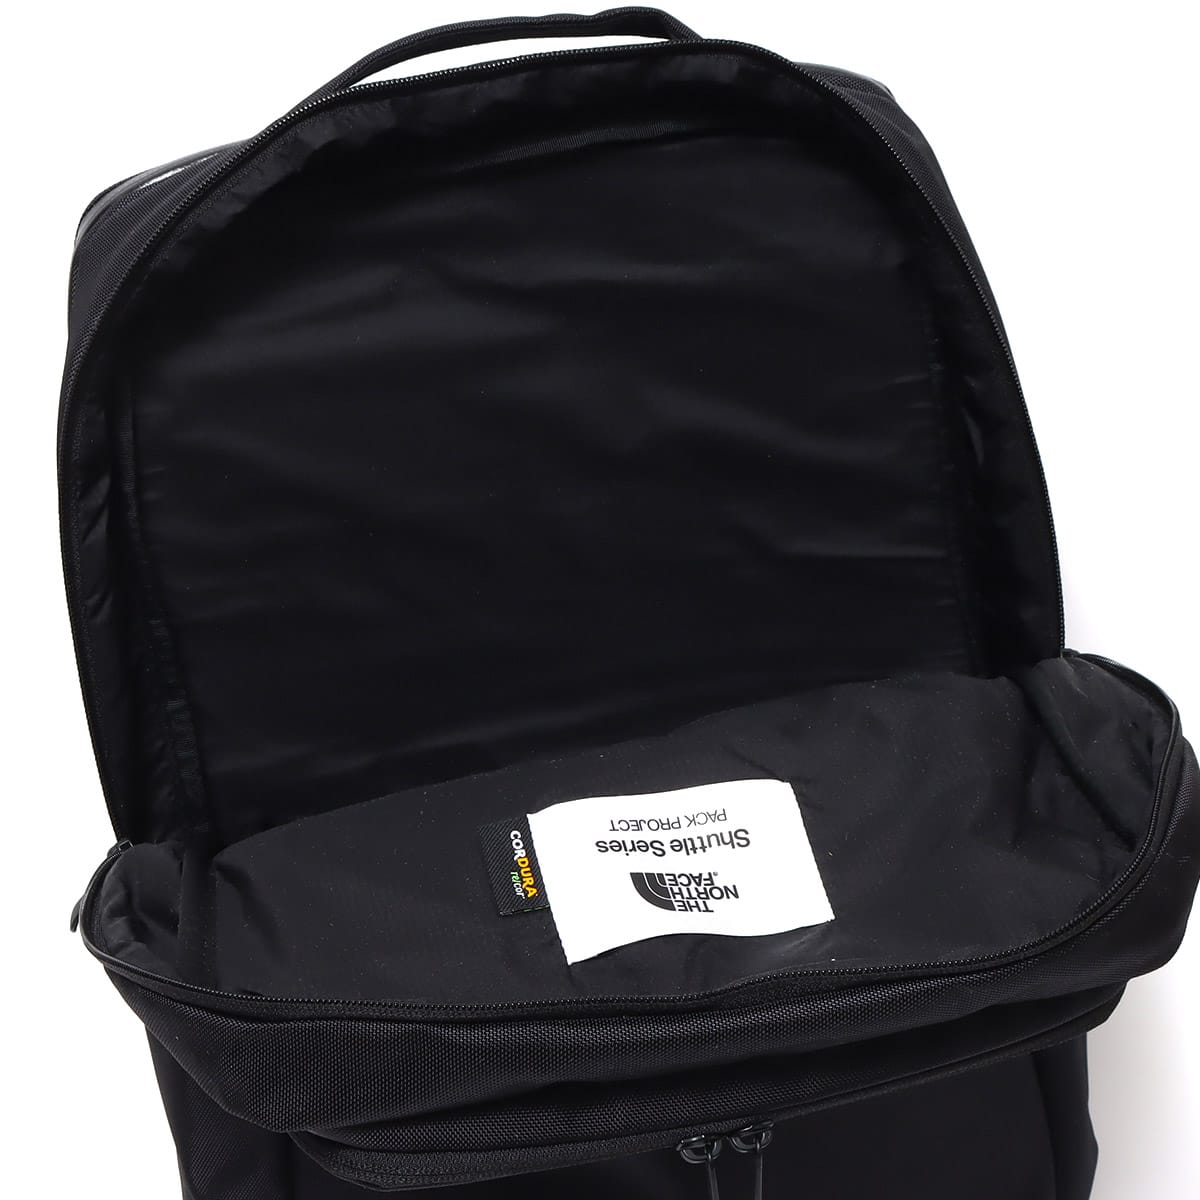 THE NORTH FACE SHUTTLE DAYPACK BLACK SS I